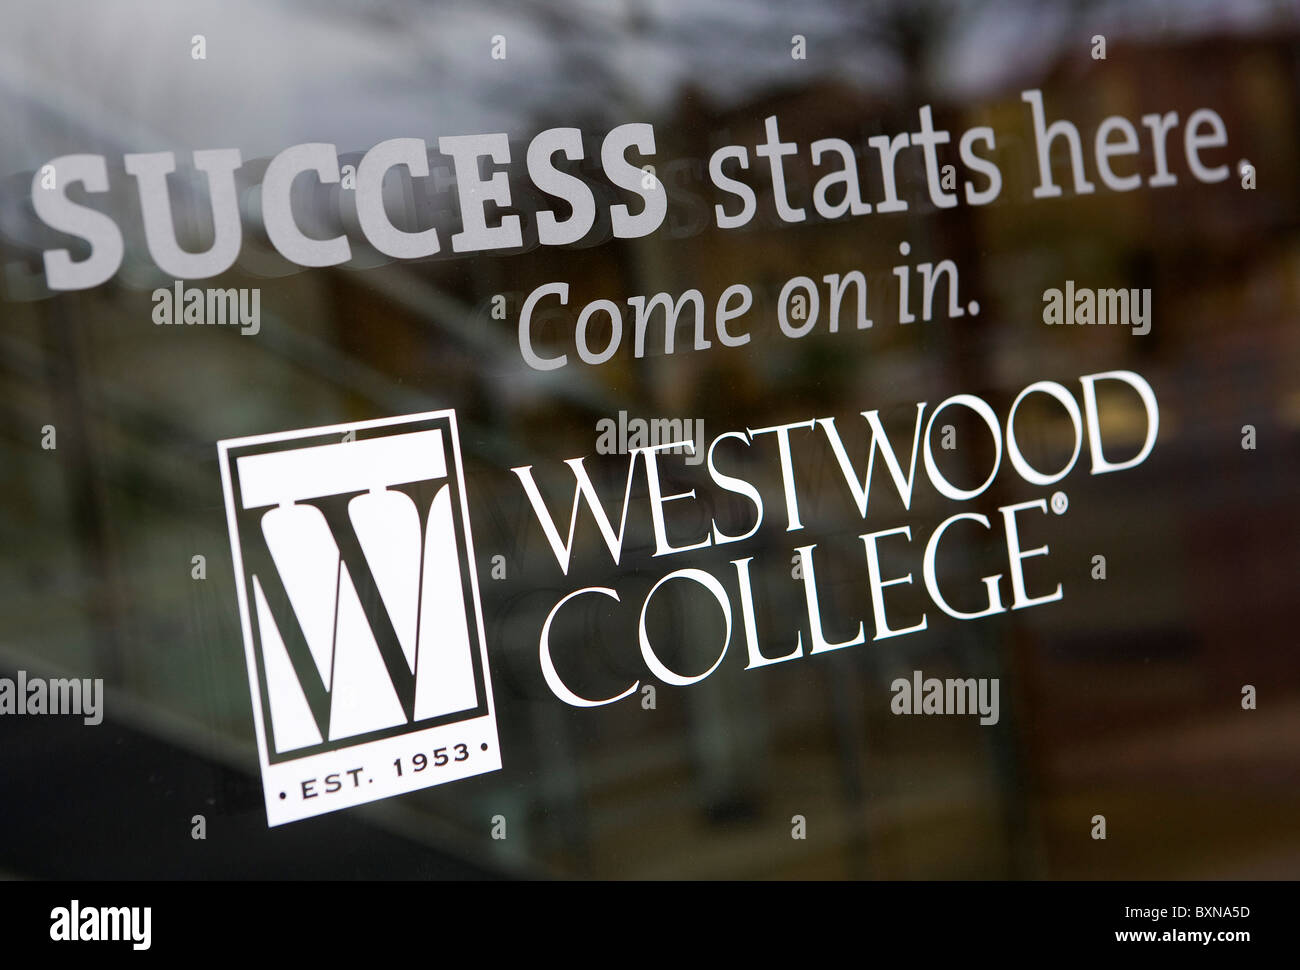 A Westwood College for-profit college. Foto Stock